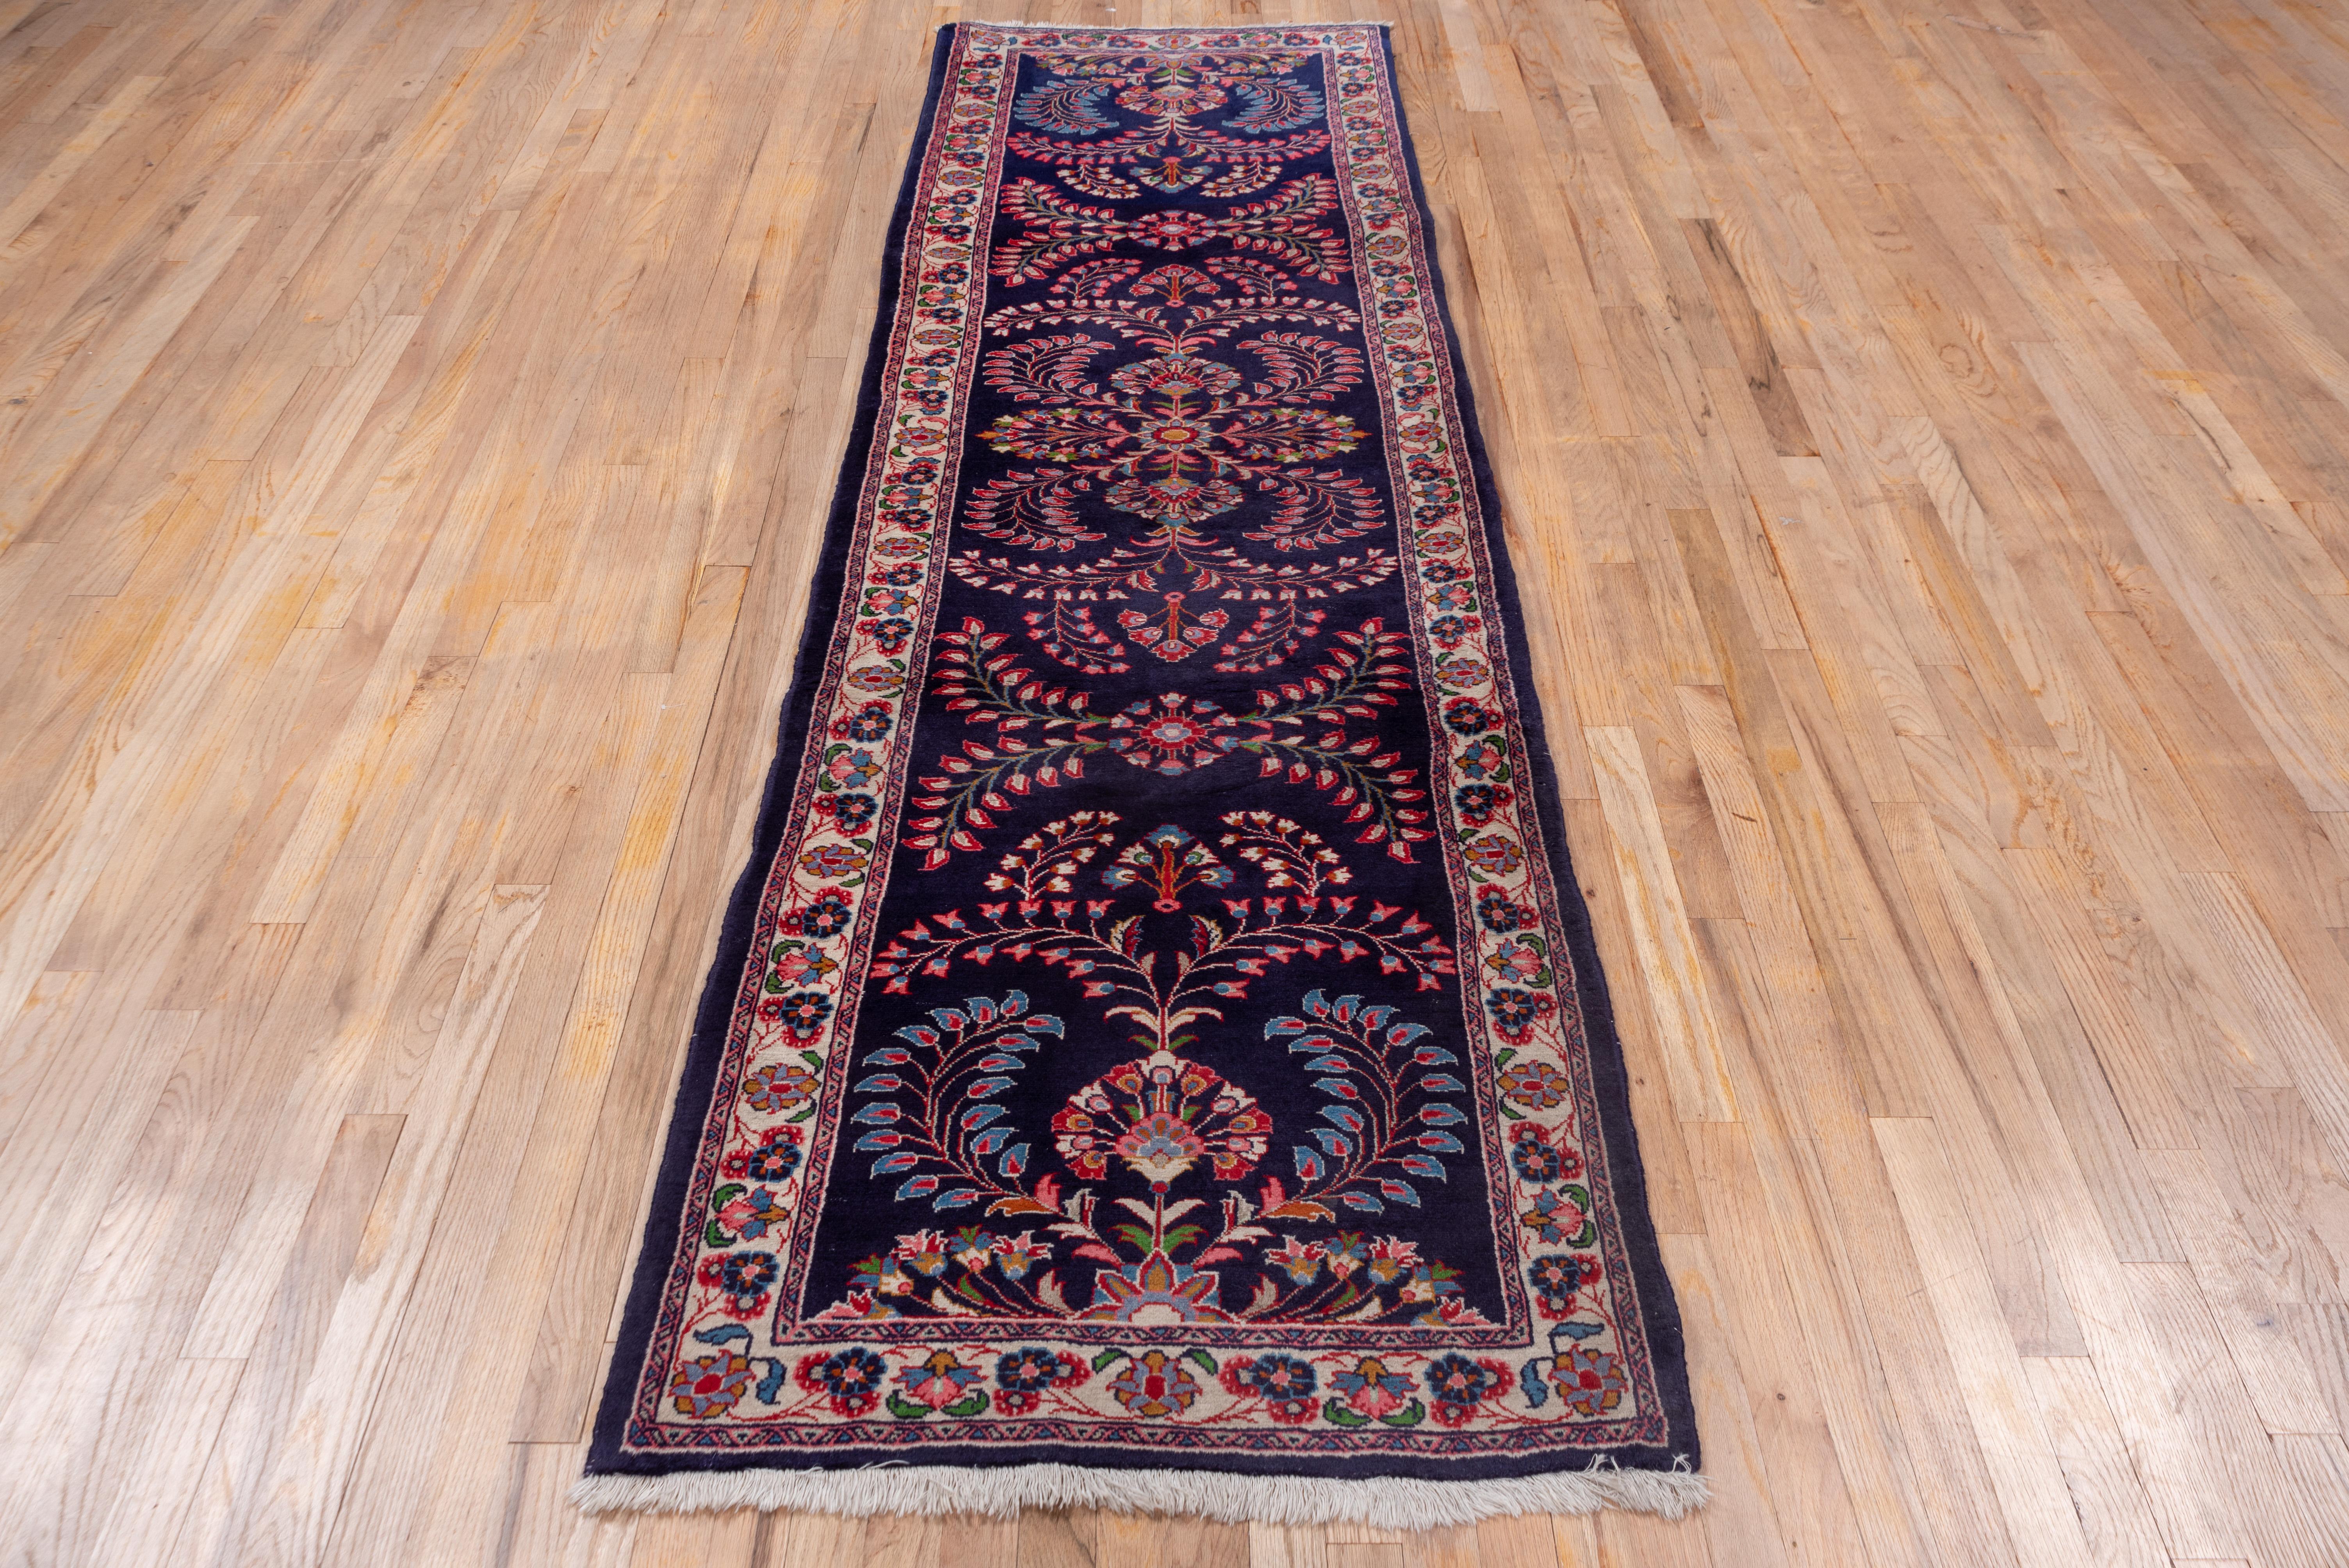 Hand-Knotted Mid-20th Century Persian Sarouk Runner, Navy Field, Red Accents, circa 1950s